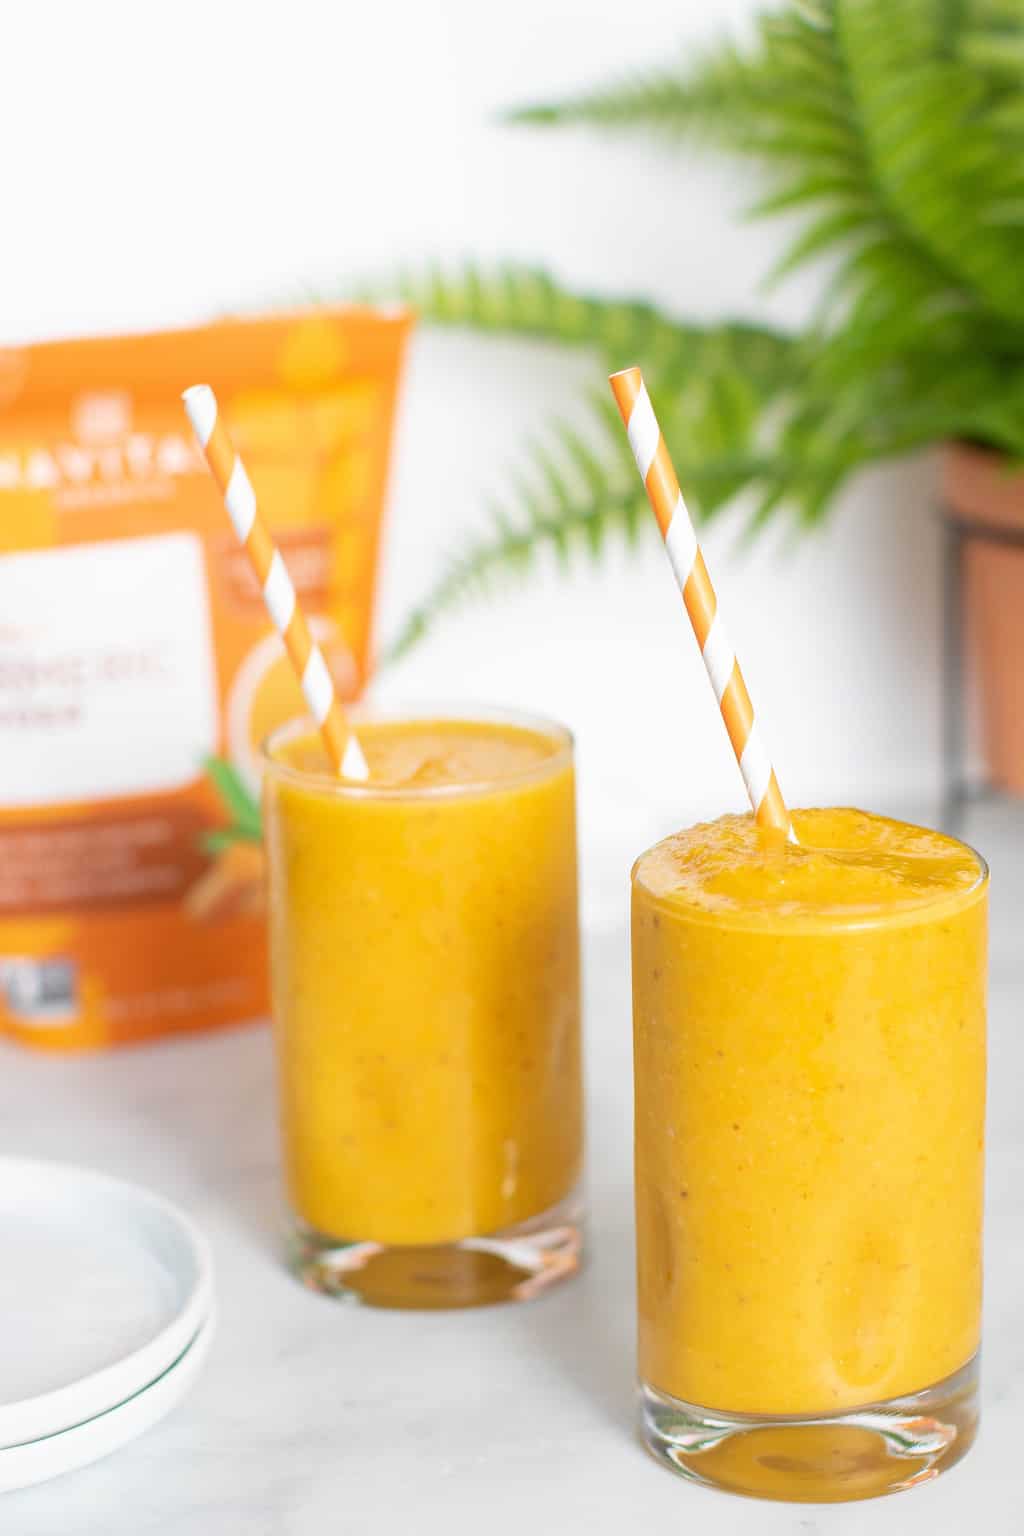 Two Turmeric \'Wake Up\' Smoothies with straws.